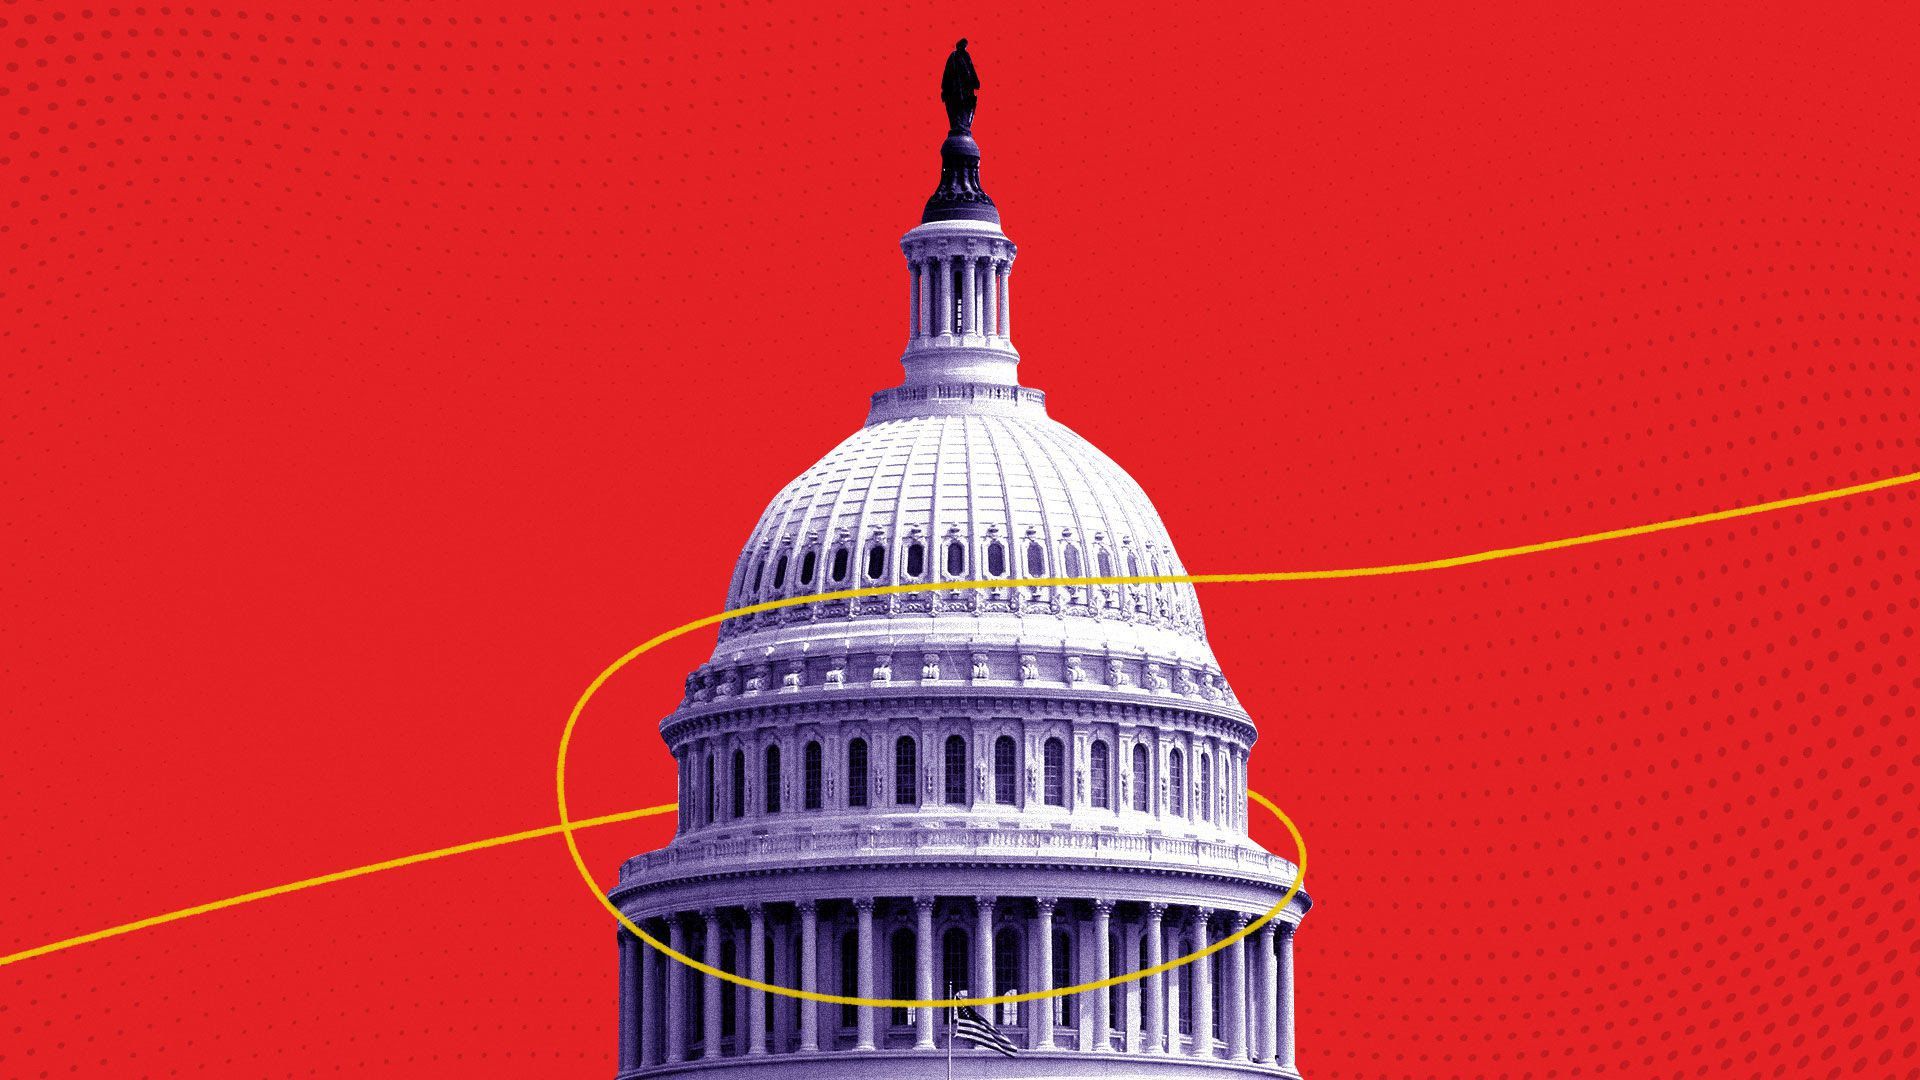 Illustration of the Capitol with a red background.